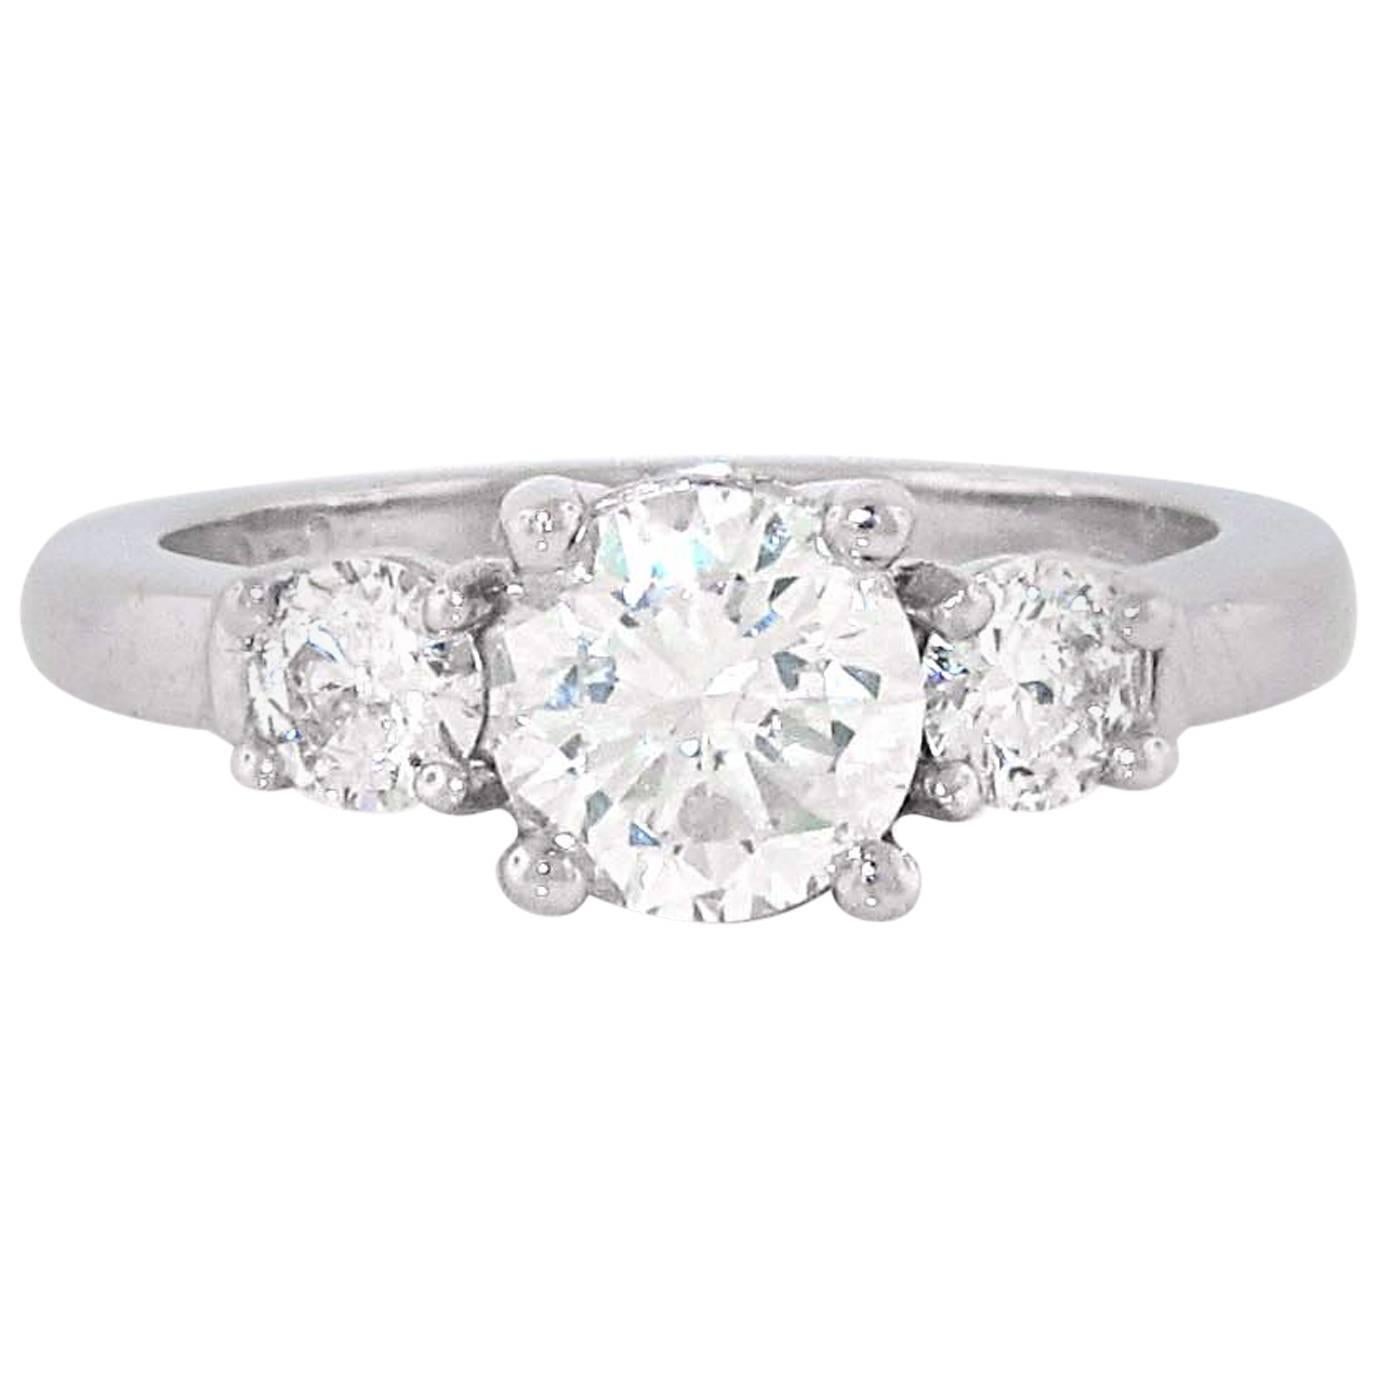 Three-Stone Platinum Diamond Engagement Ring. Approx 1.25ct total weight